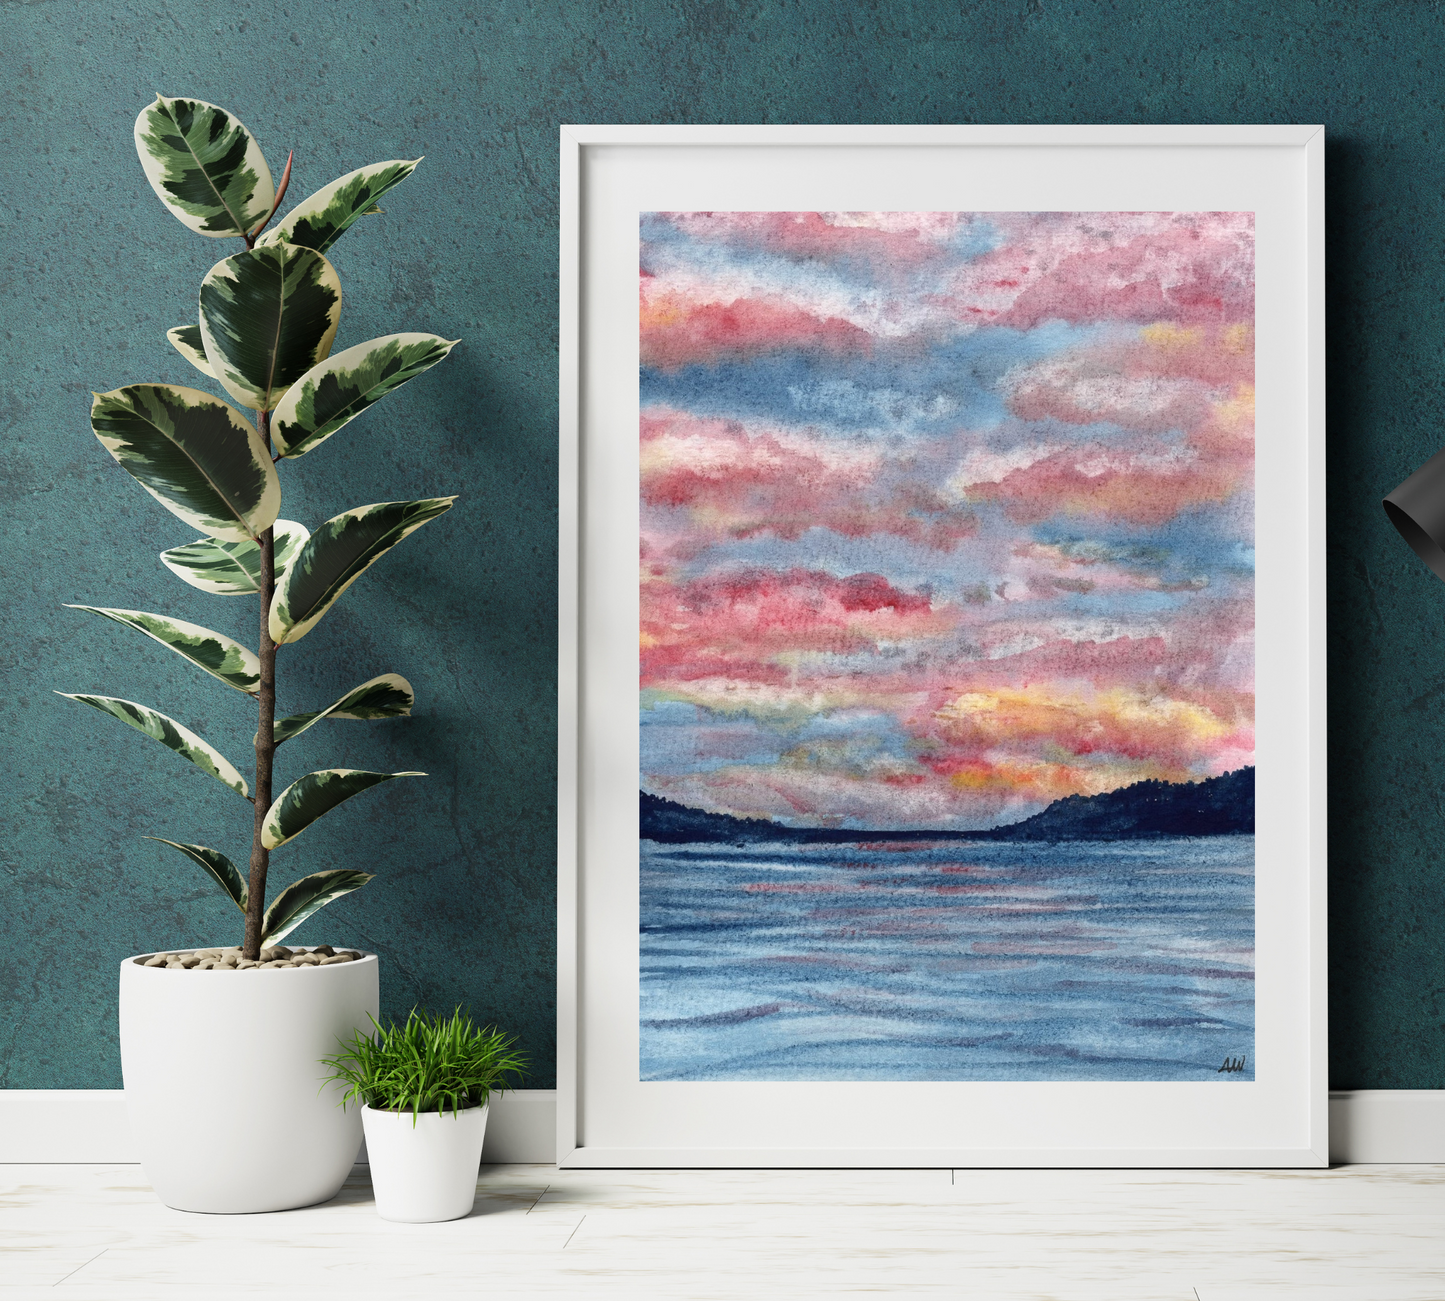 Cotton Candy Skies in Pen and Watercolor - Archival Quality Art Print